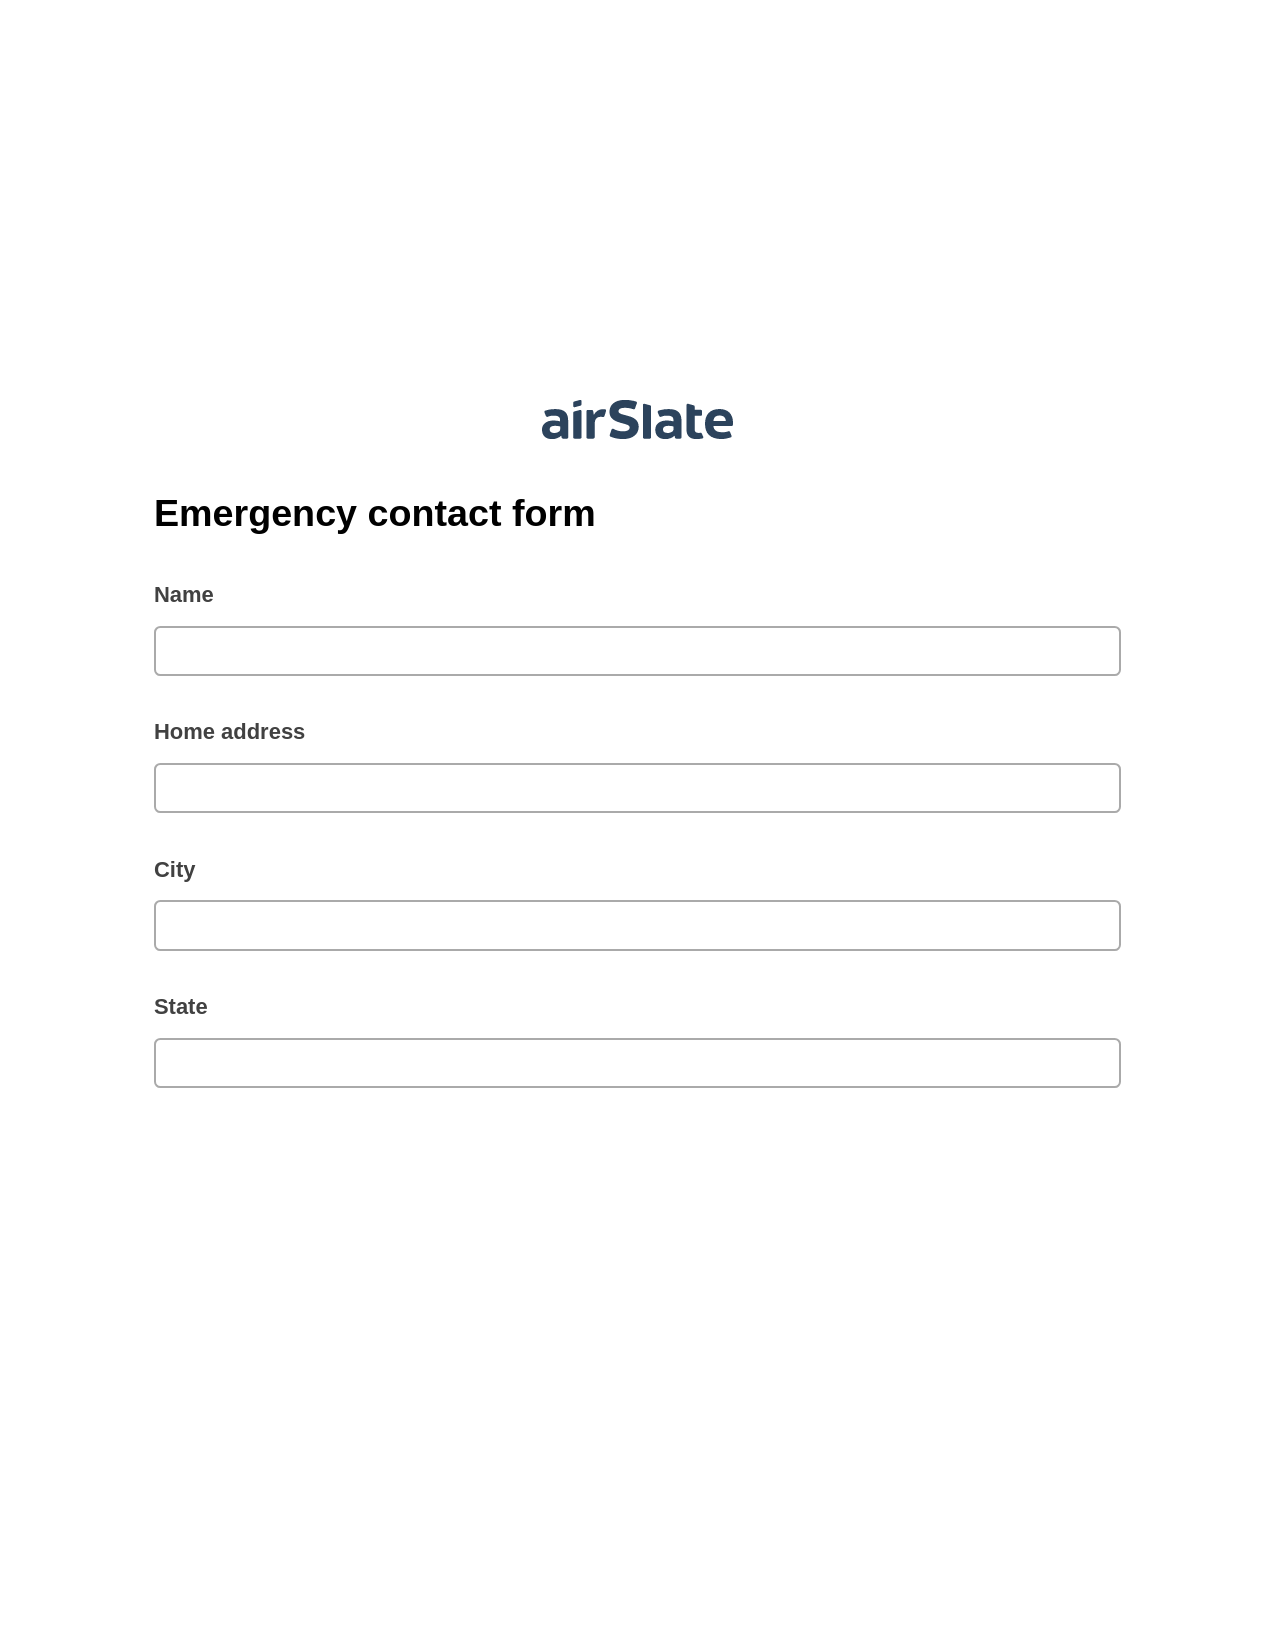 Multirole Emergency contact form Pre-fill Slate from MS Dynamics 365 Records Bot, Create QuickBooks invoice Bot, Export to Google Sheet Bot